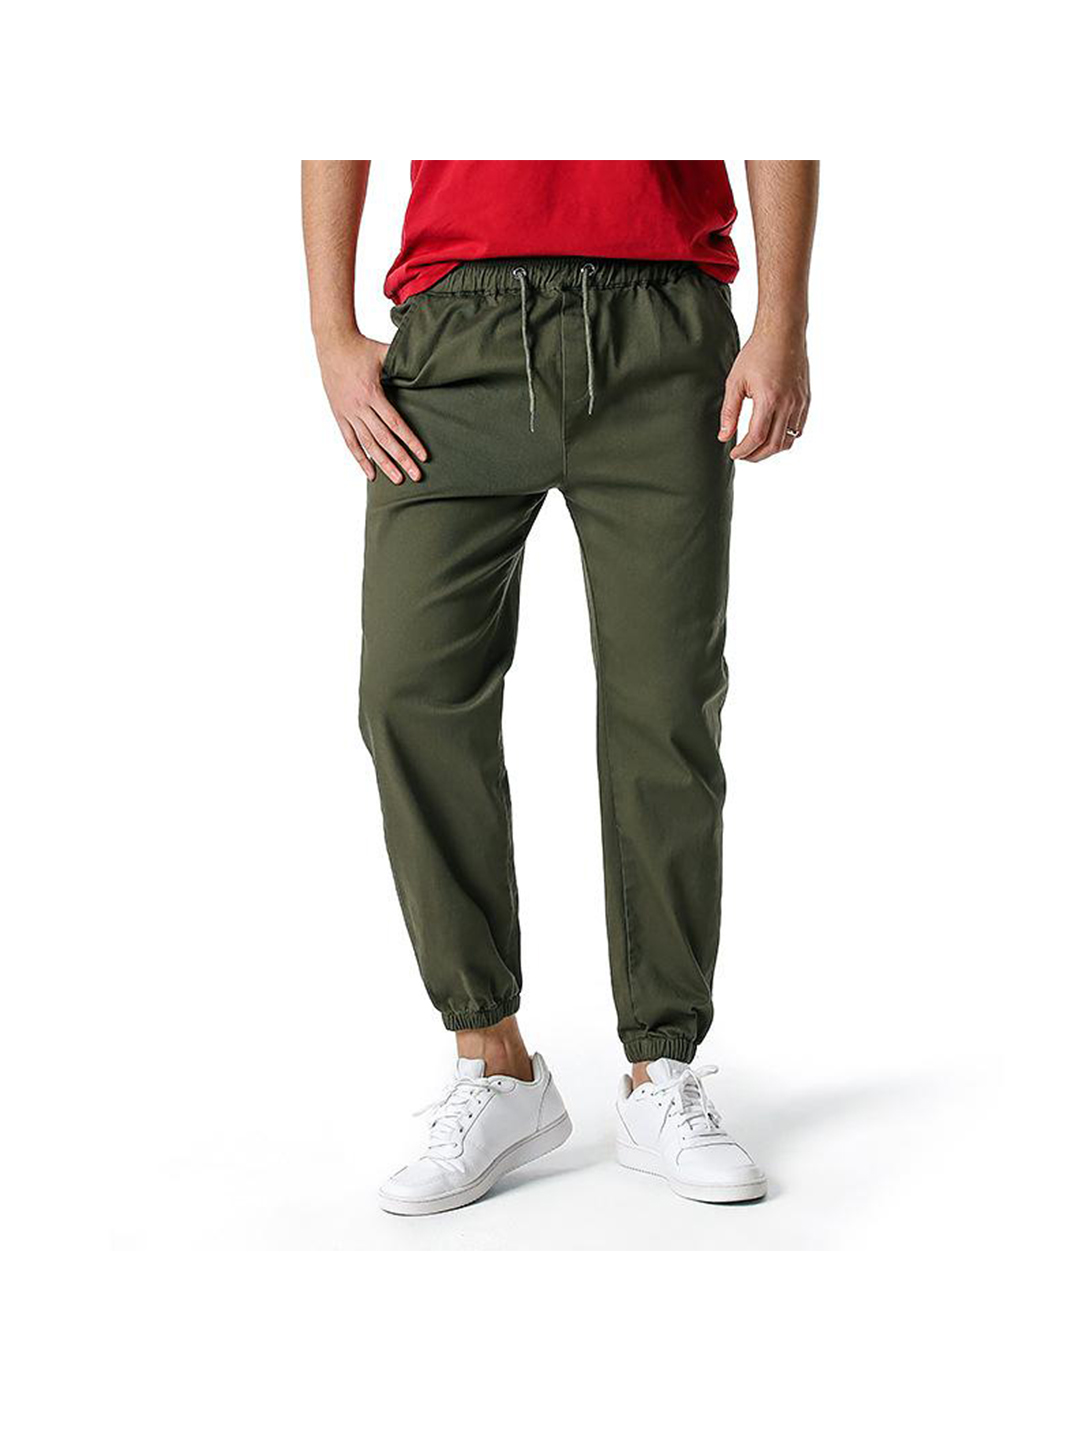 Howell Solid Color Adjustable Waist Casual Jogger